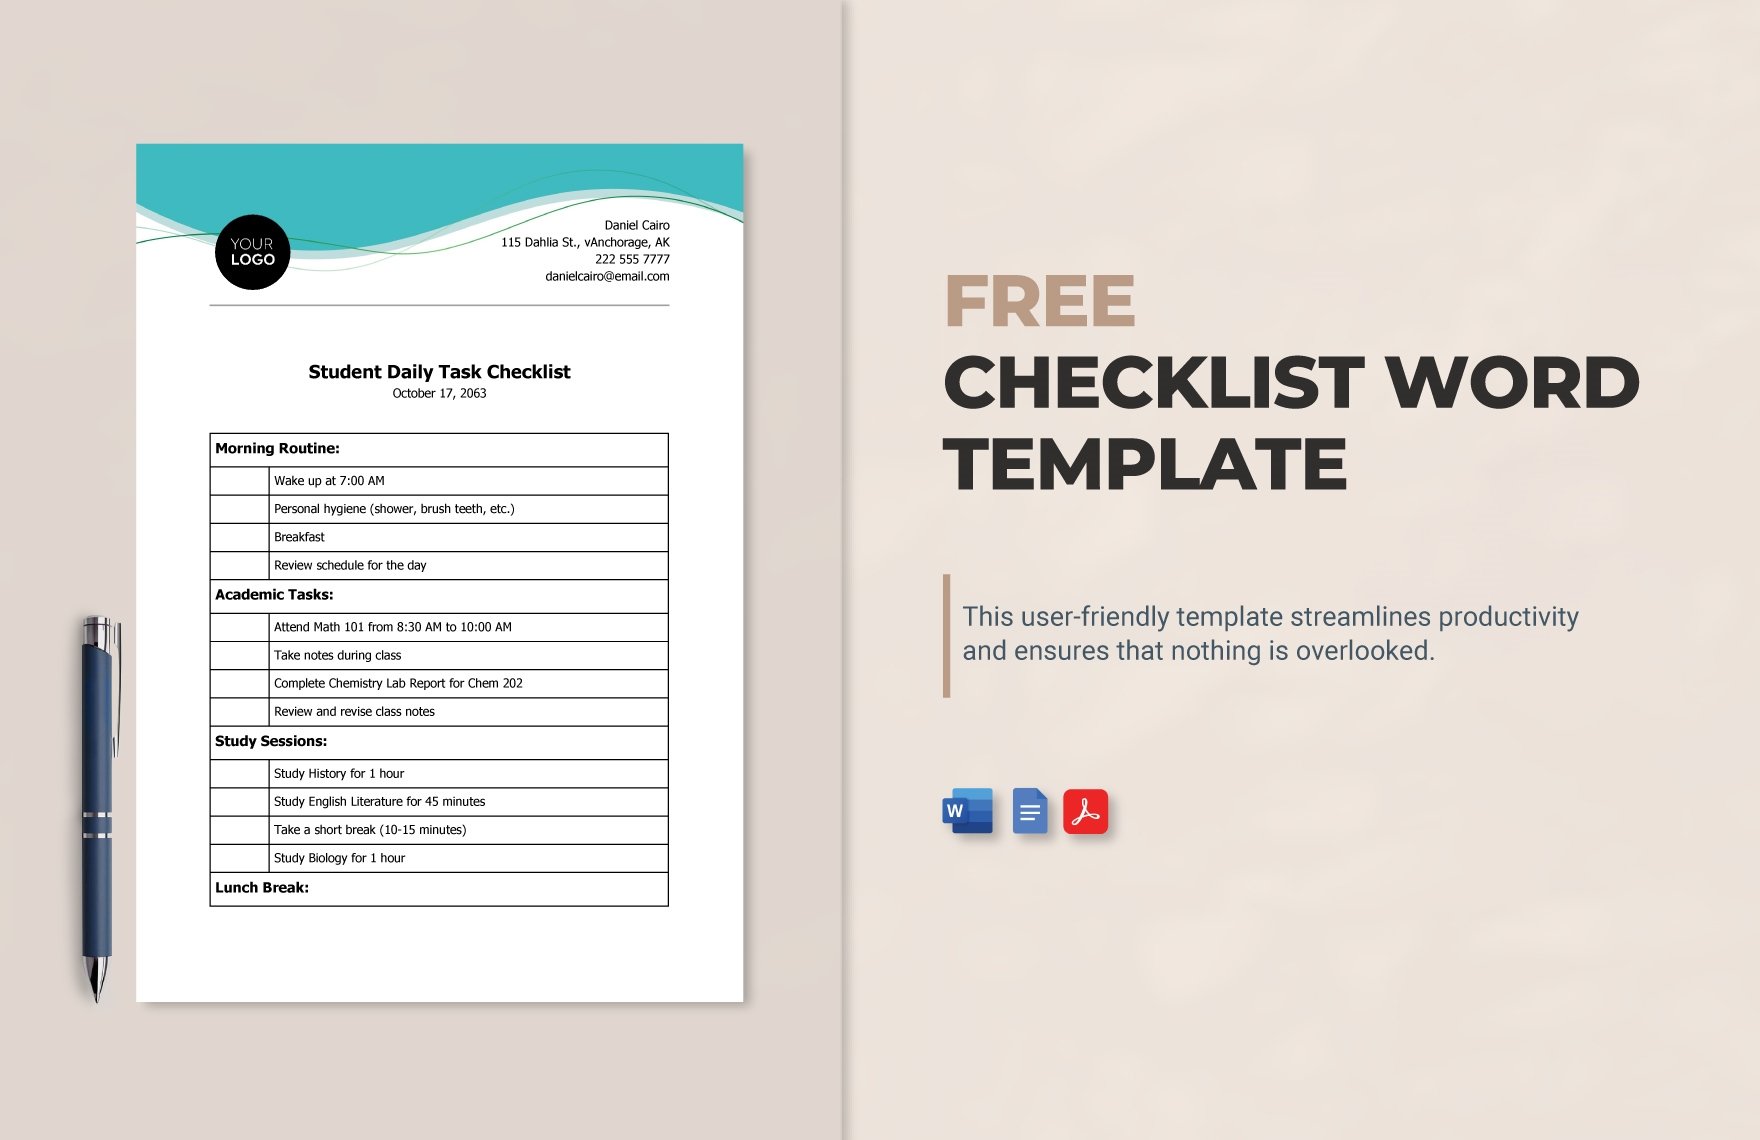 Checklist Template in Word - FREE Download